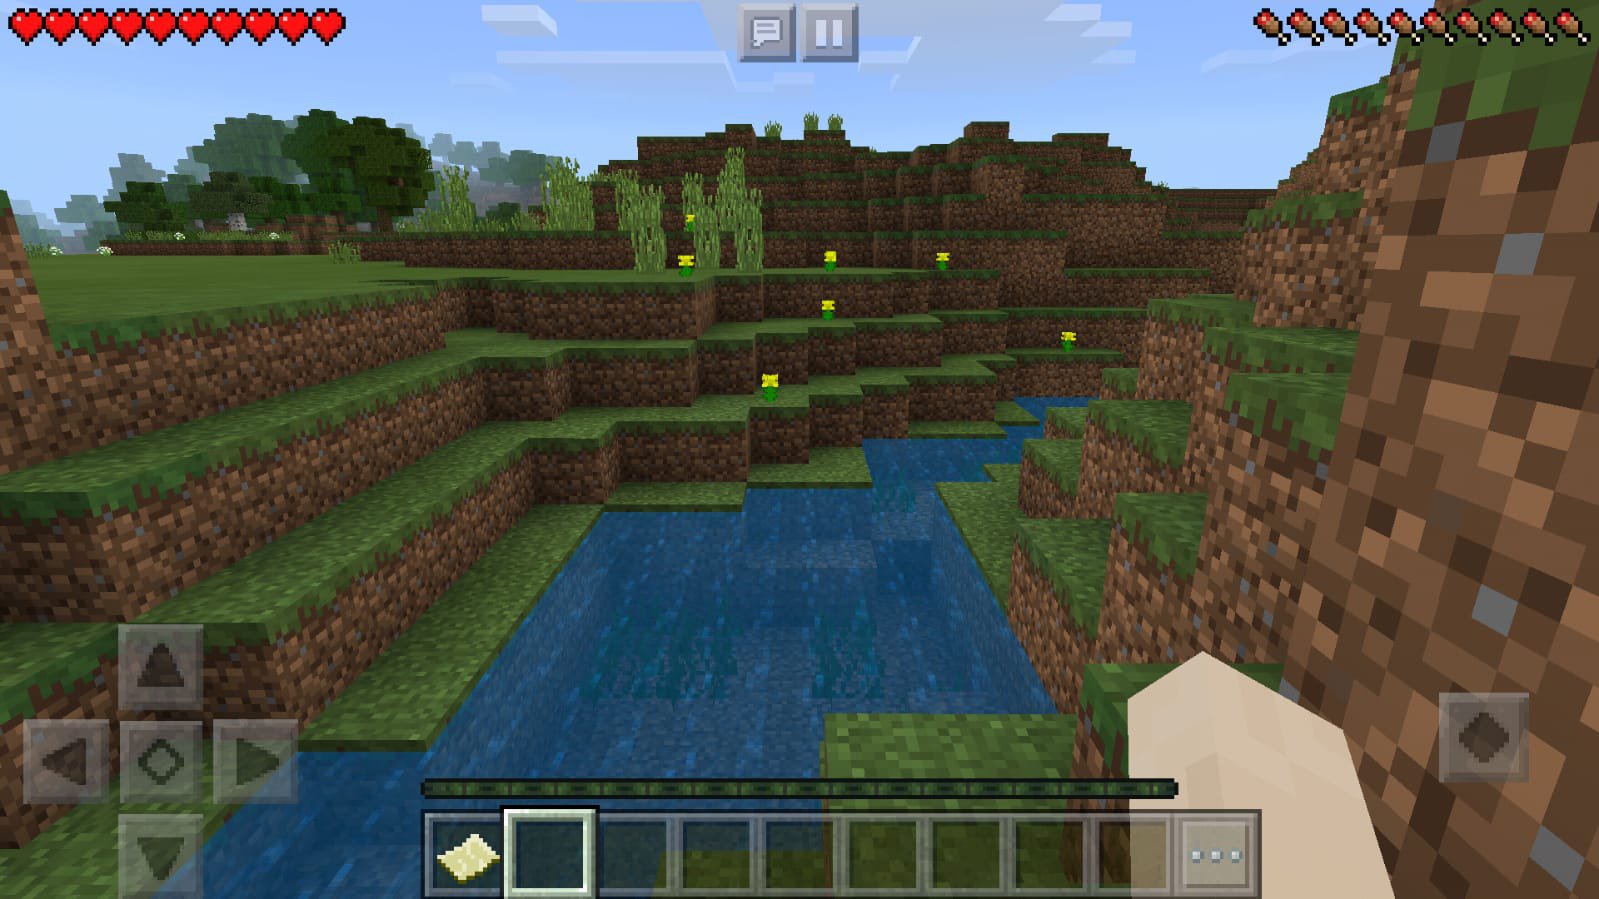 Download minecraft pocket edition apk full version for android